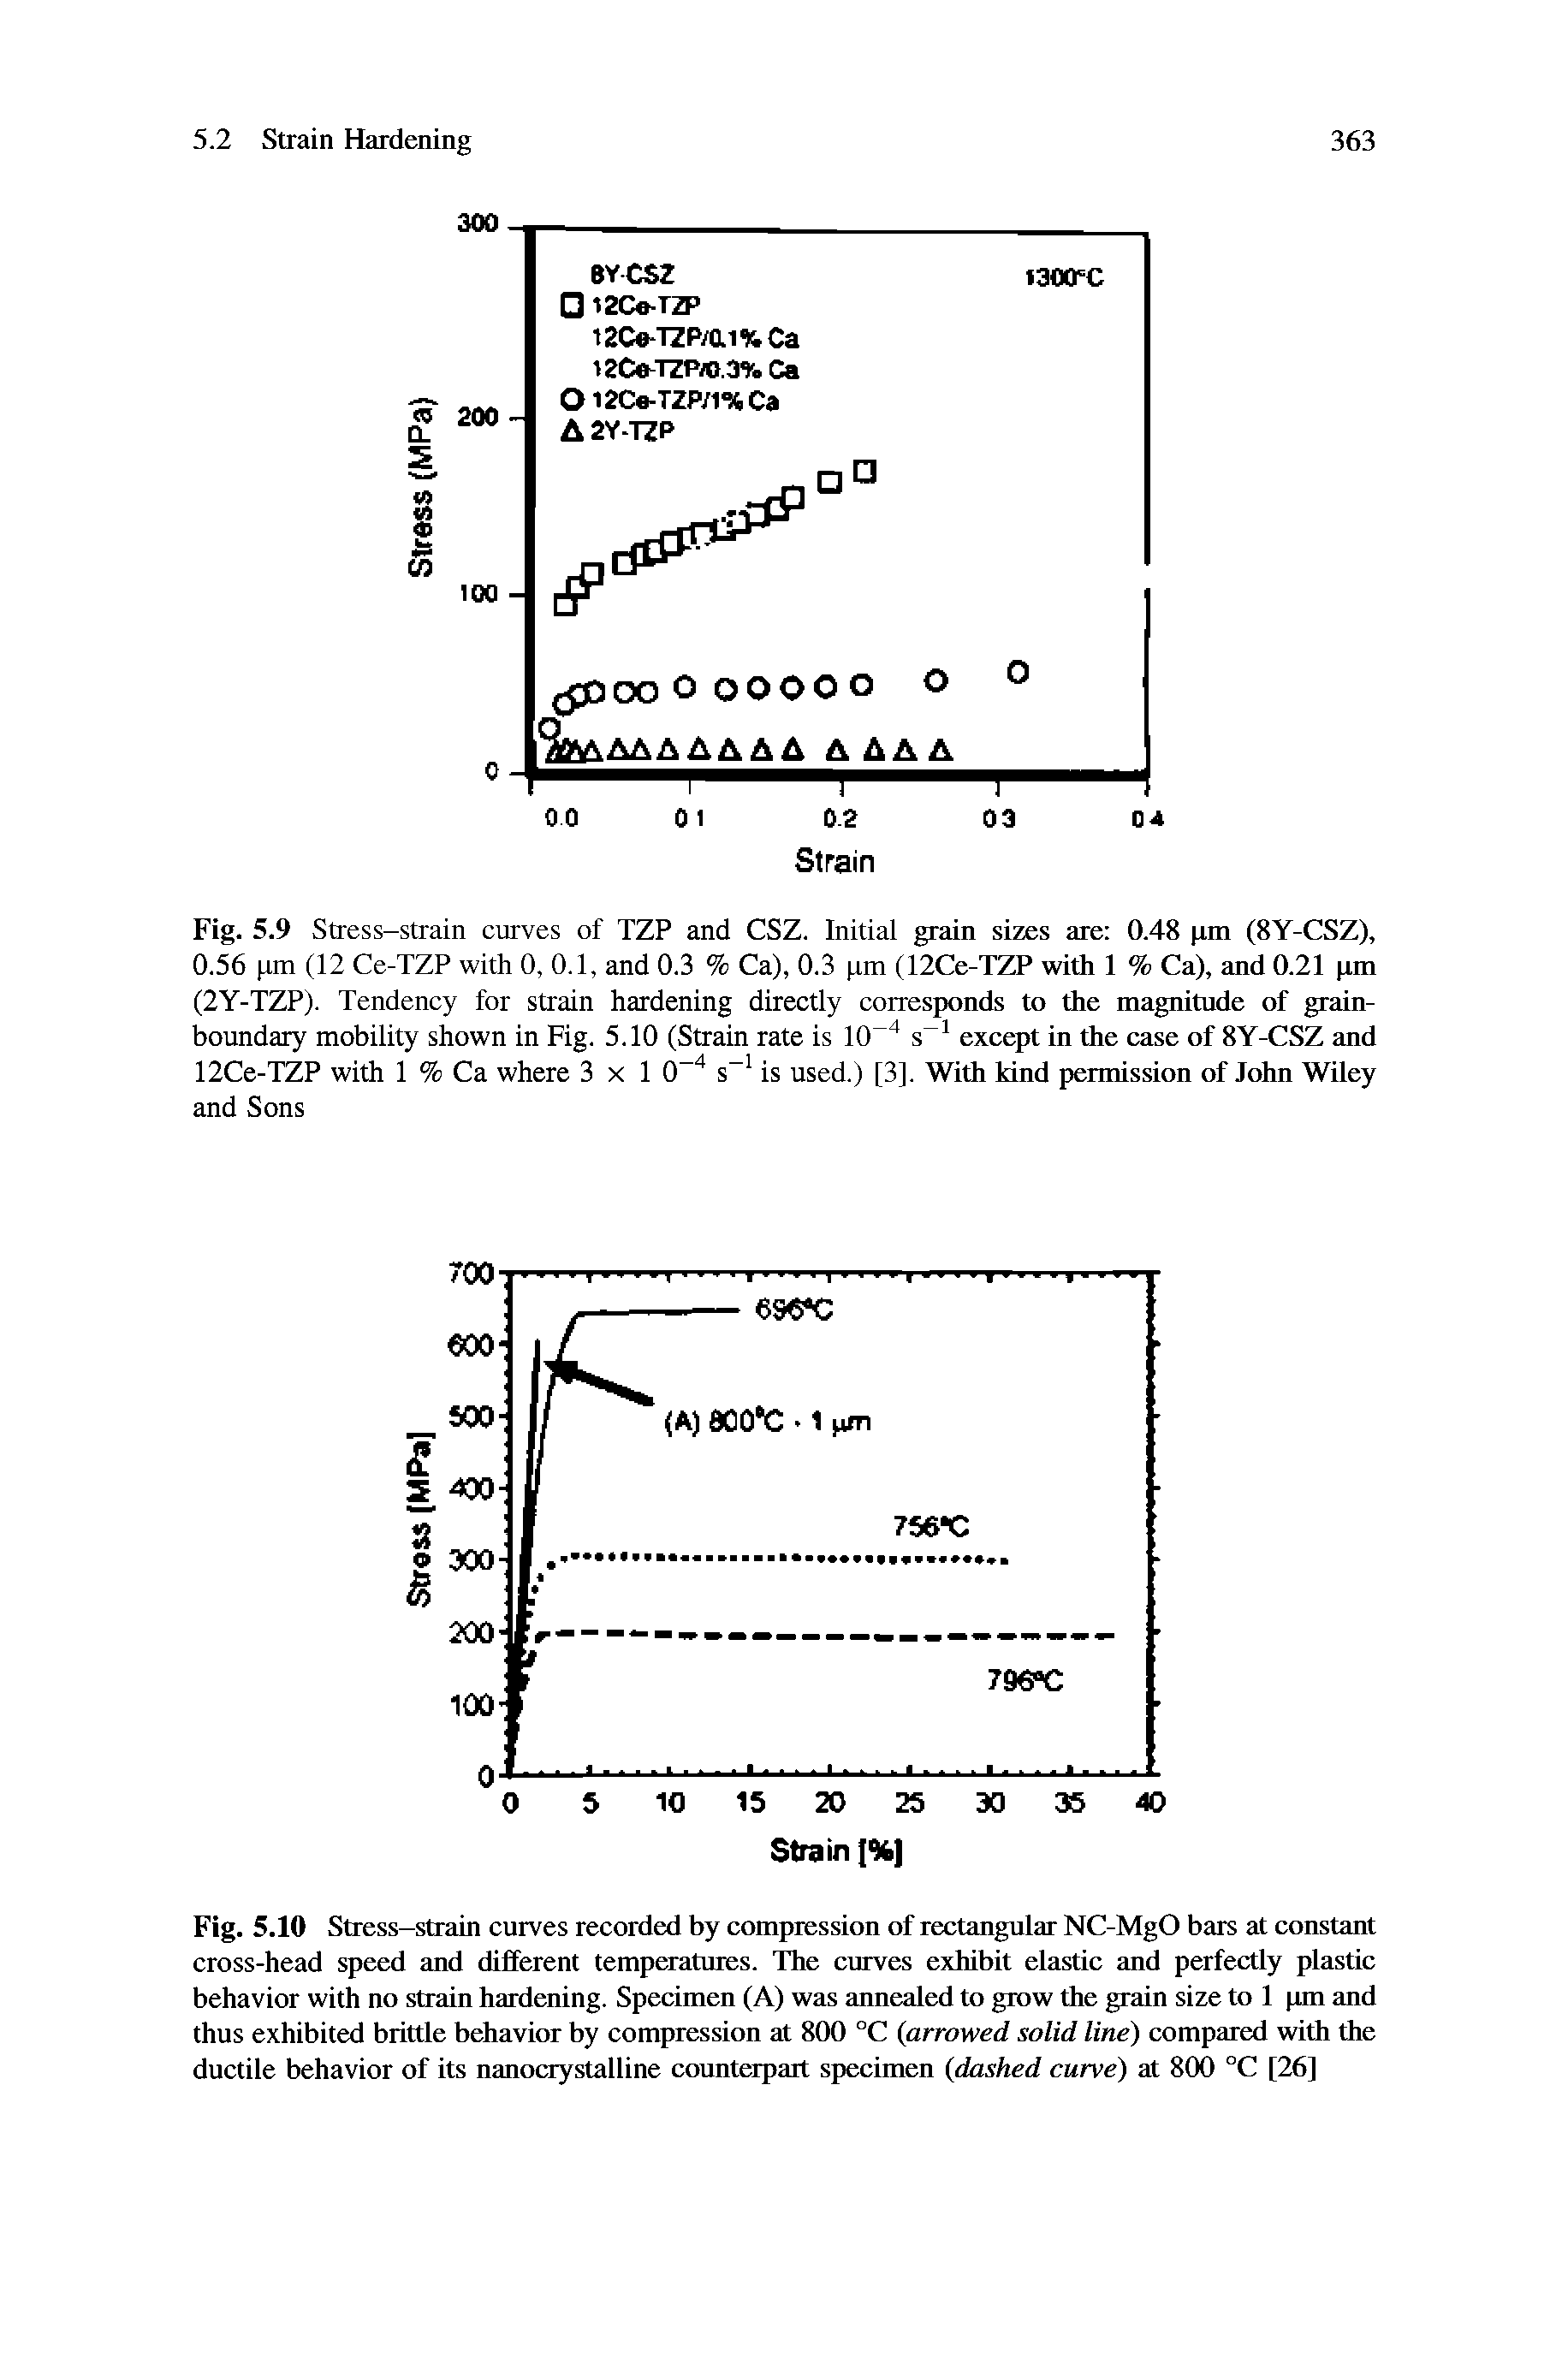 Fig. 5.10 Stress-strain curves recorded by compression of rectangular NC-MgO bars at constant cross-head speed and different temperatures. The curves exhibit elastic and perfectly plastic behavior with no strain hardening. Specimen (A) was annealed to grow the grain size to 1 pm and thus exhibited brittle behavior by compression at 800 °C arrowed solid line) compared with the ductile behavior of its nanocrystalline counterpart specimen dashed curve) at 800 °C [26]...